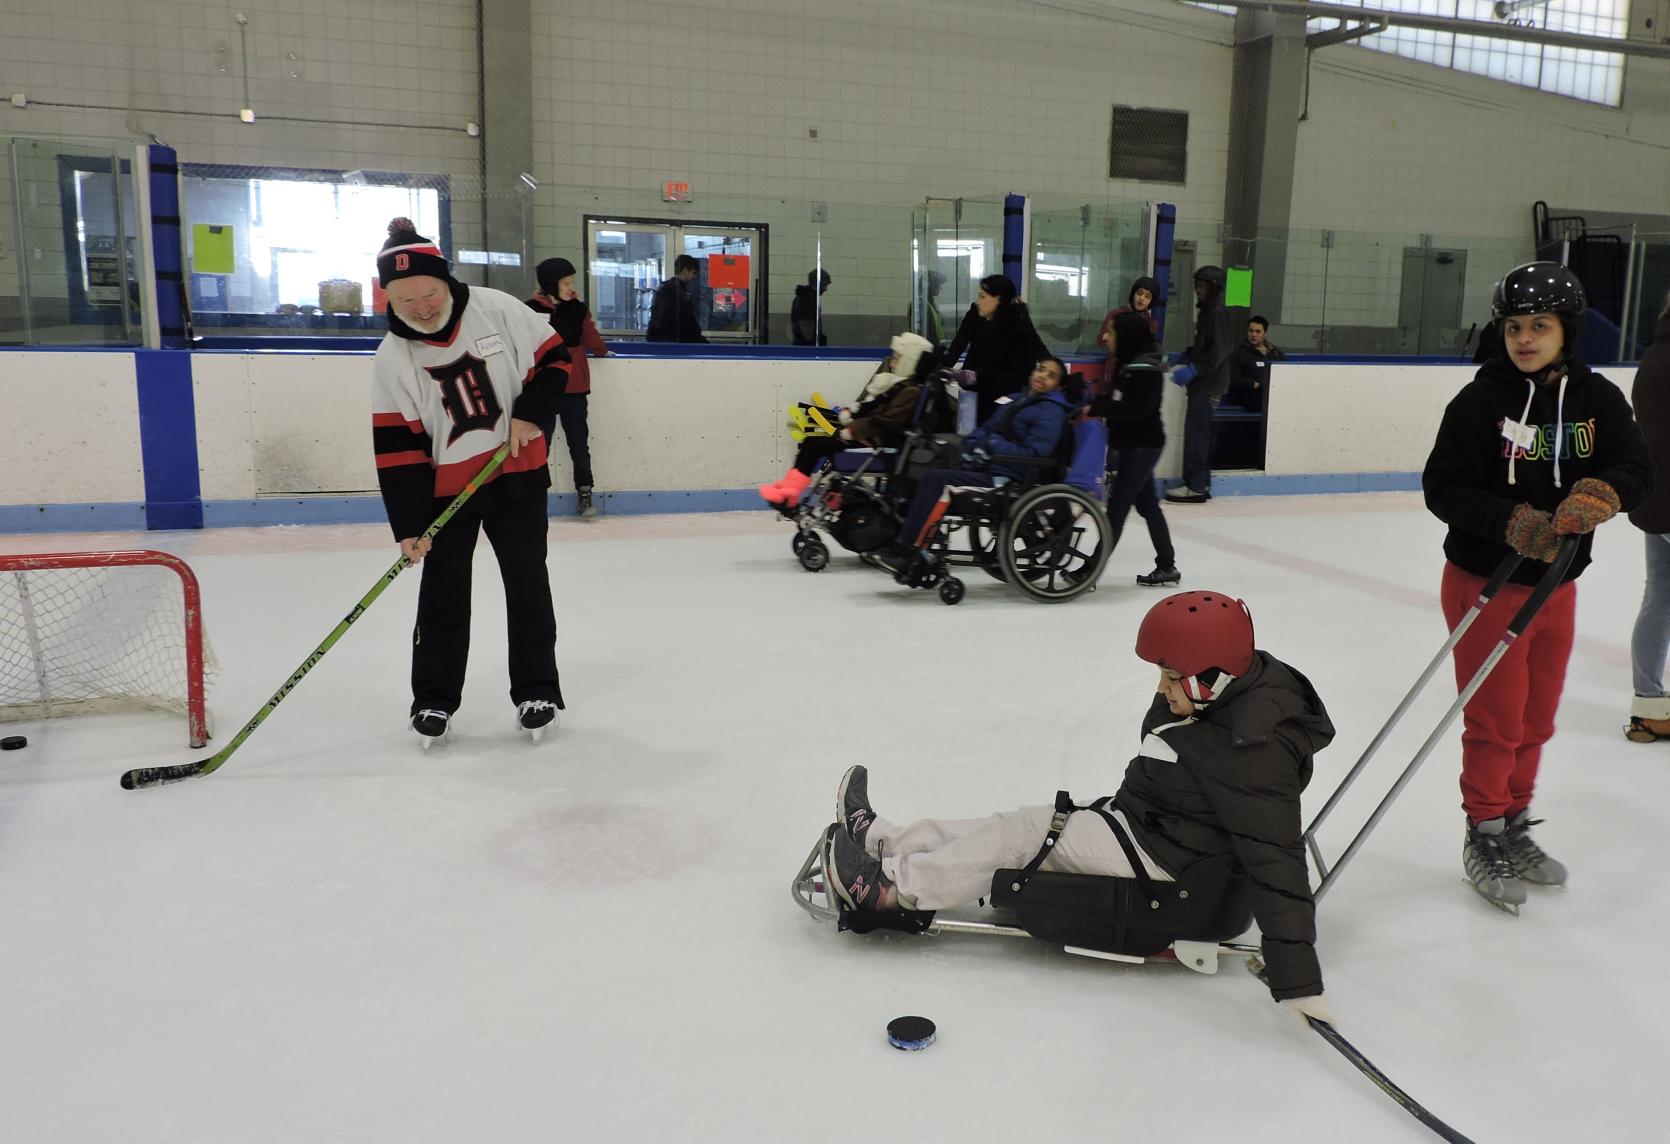 A sled skater lines up a shot at a hockey net.